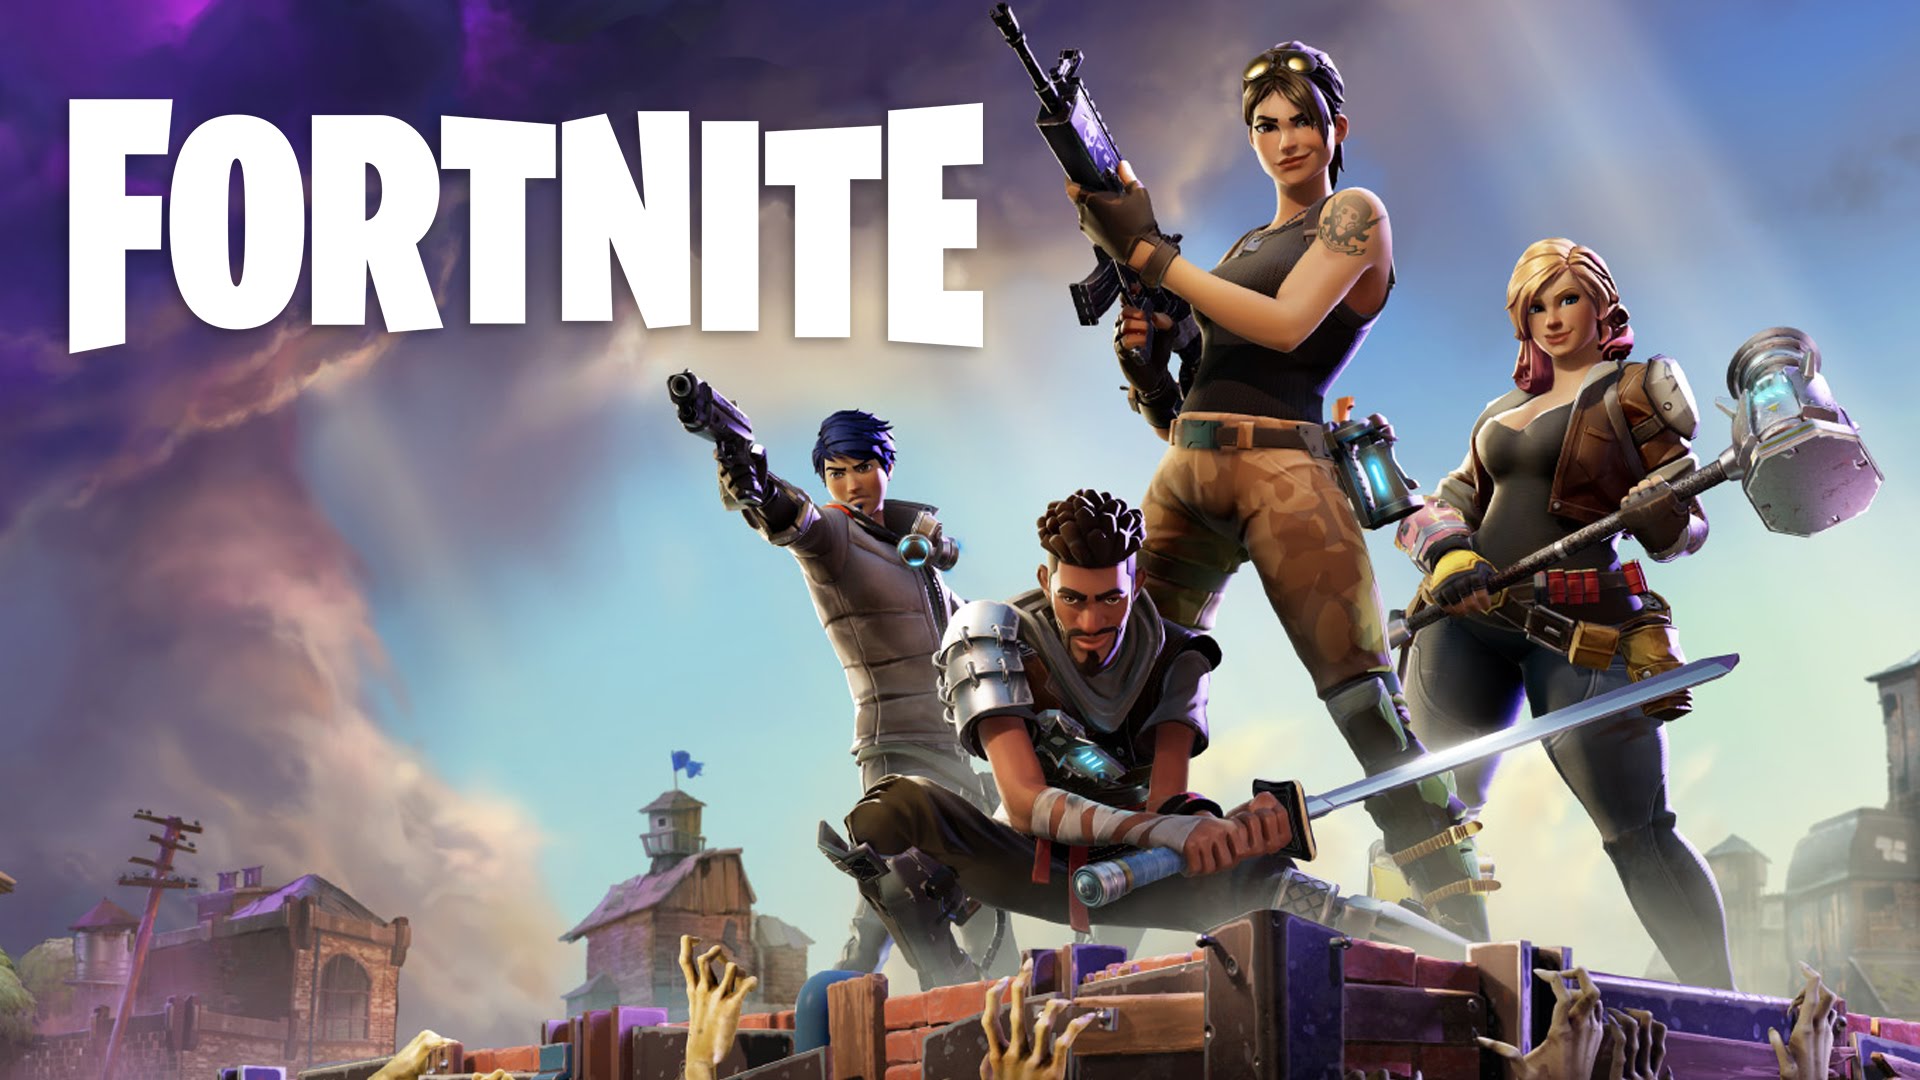 Be Careful How You Install Fortnite Information Age Acs - gaming giant epic games has inadvertently created new security risks as an unknown numbers of android users have download malware infested knockoffs of its